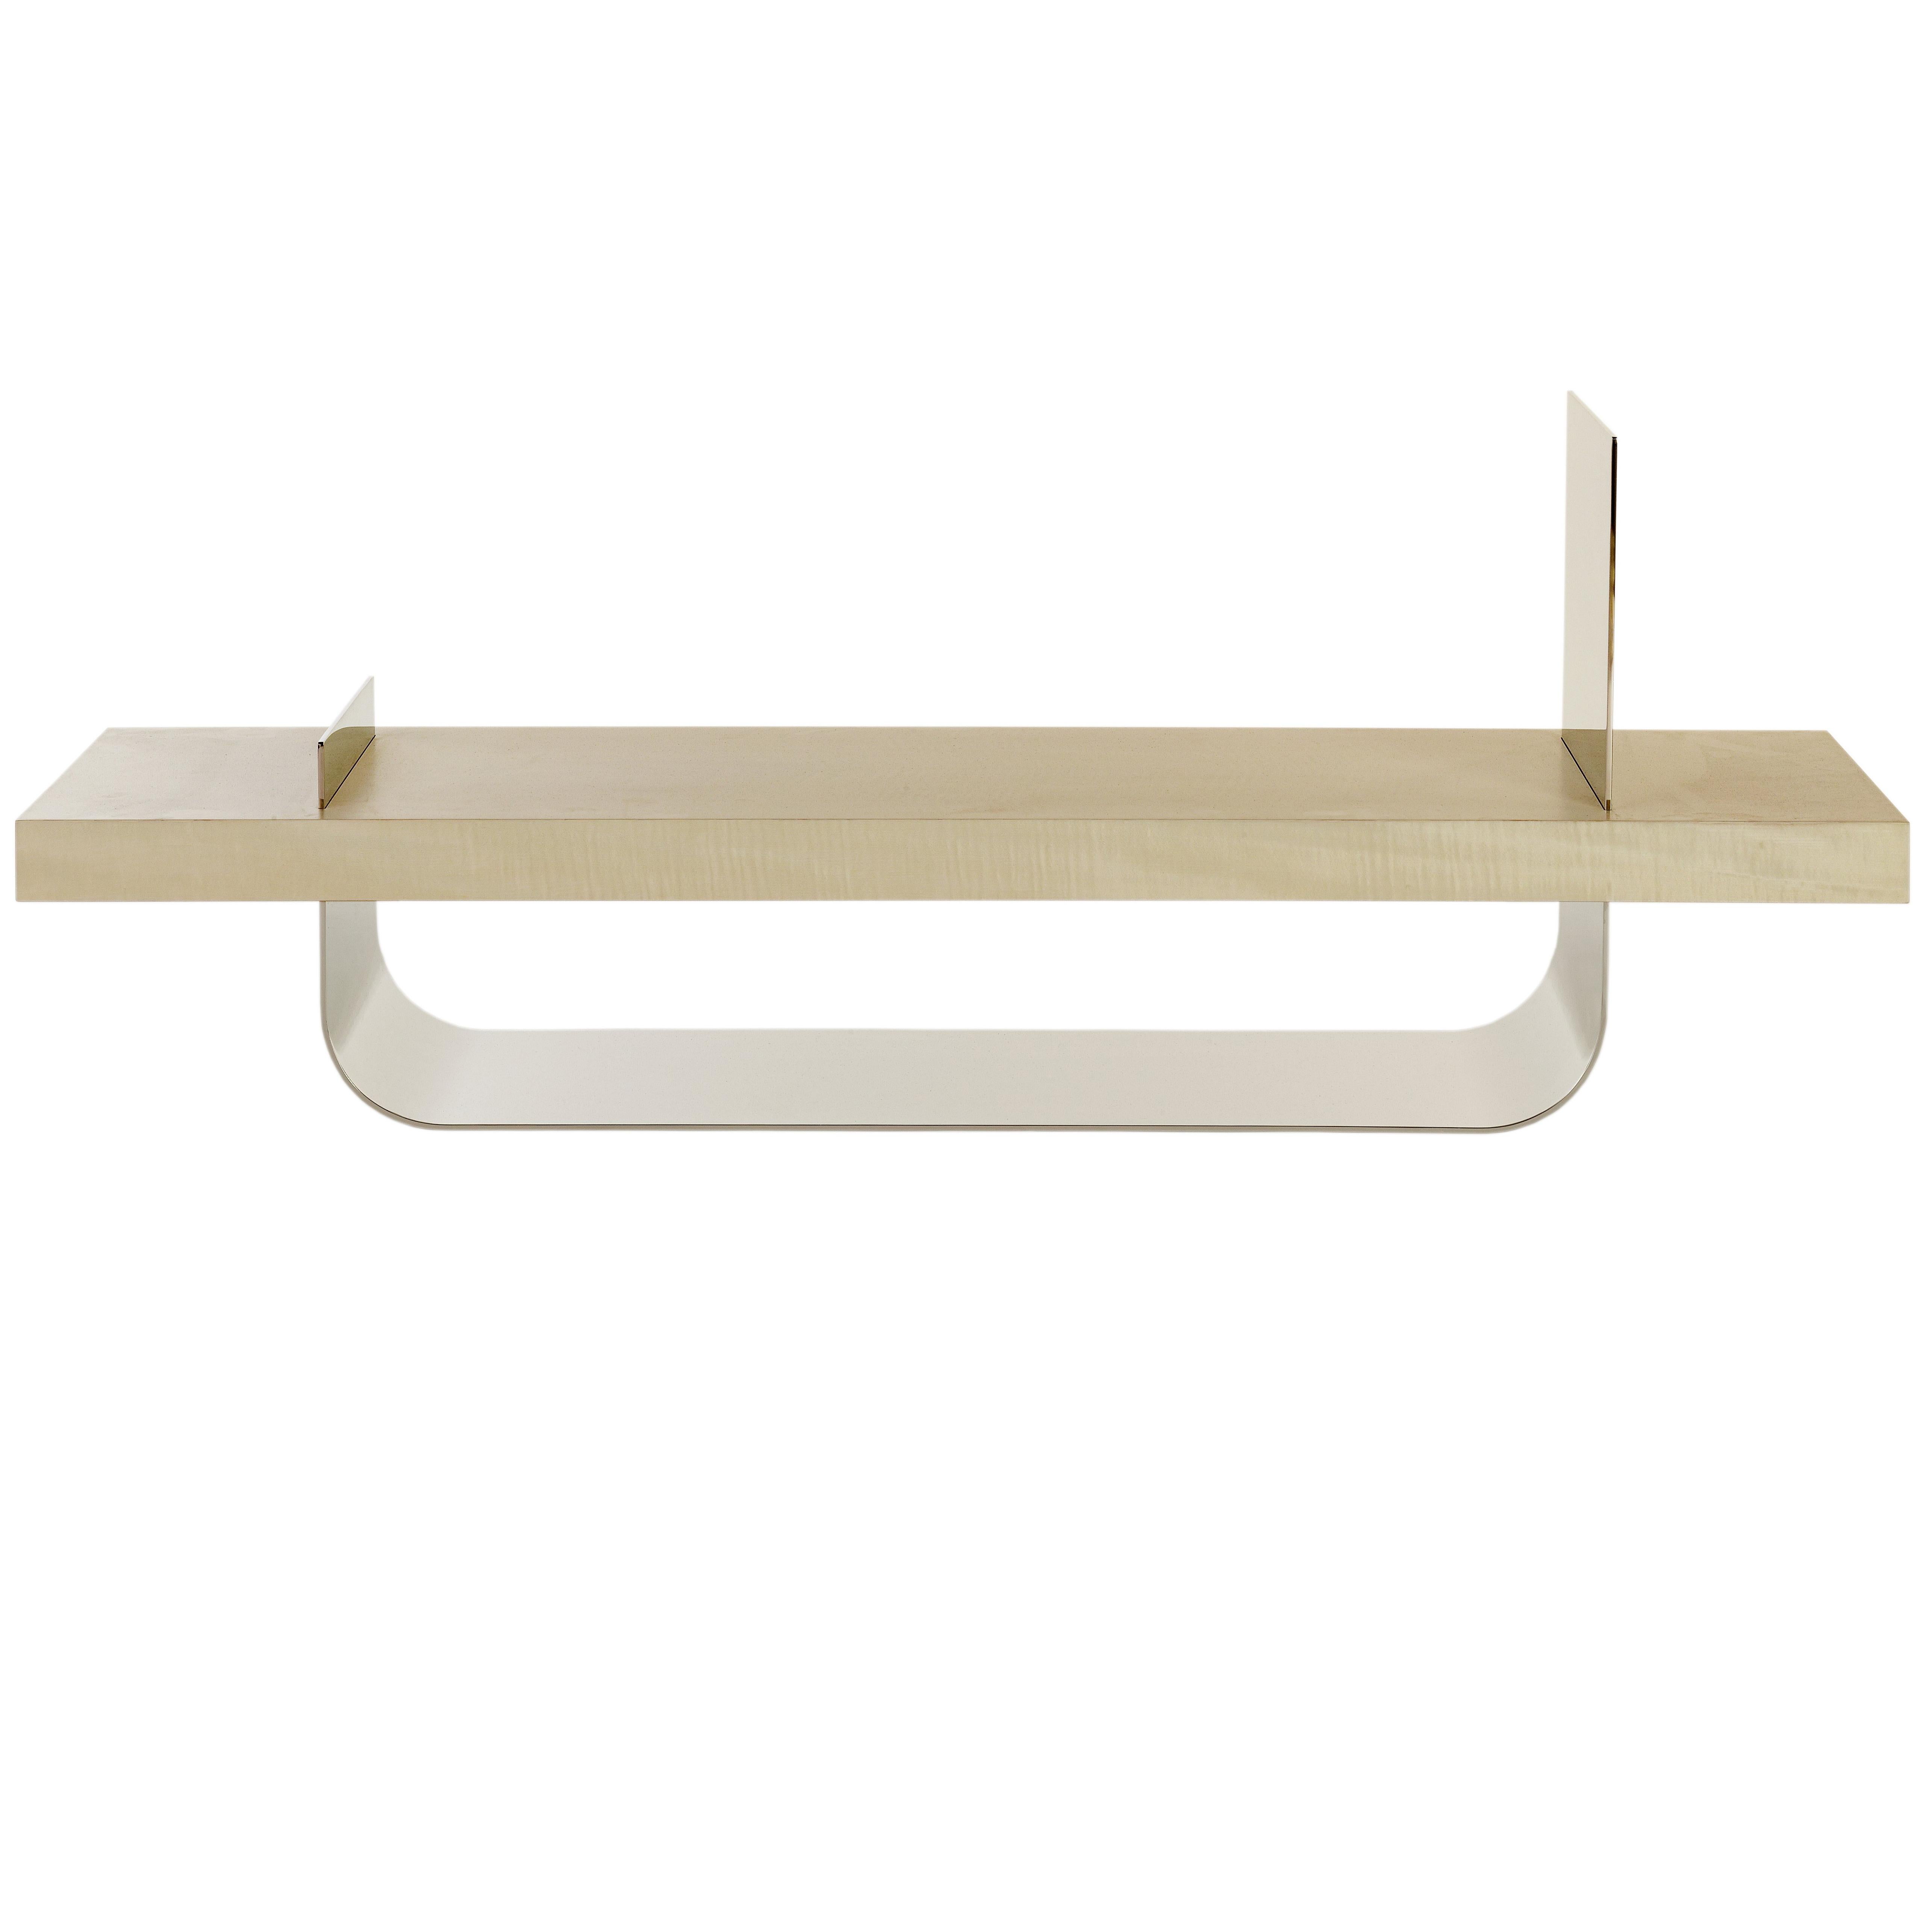 Plie Wall Shelf from the De Plus Collection by Azadeh Shladovsky For Sale